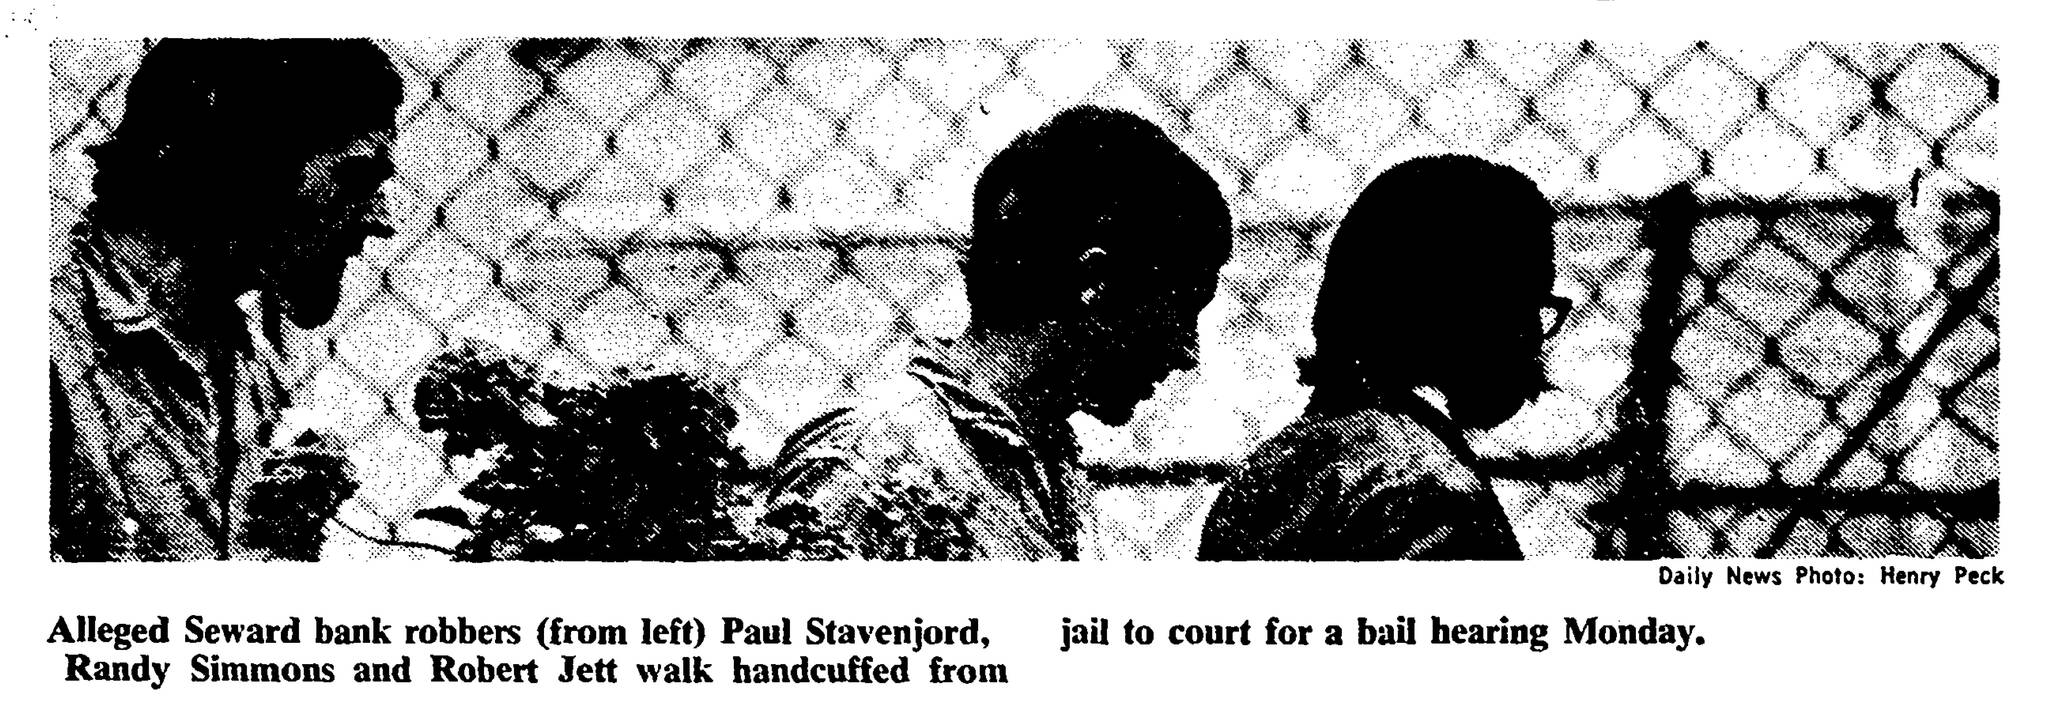 This August 1971 Anchorage Daily News photo shows bank robbery suspects Paul Stavenjord, Robert Jett and Randy Simmons heading to their bail hearing.